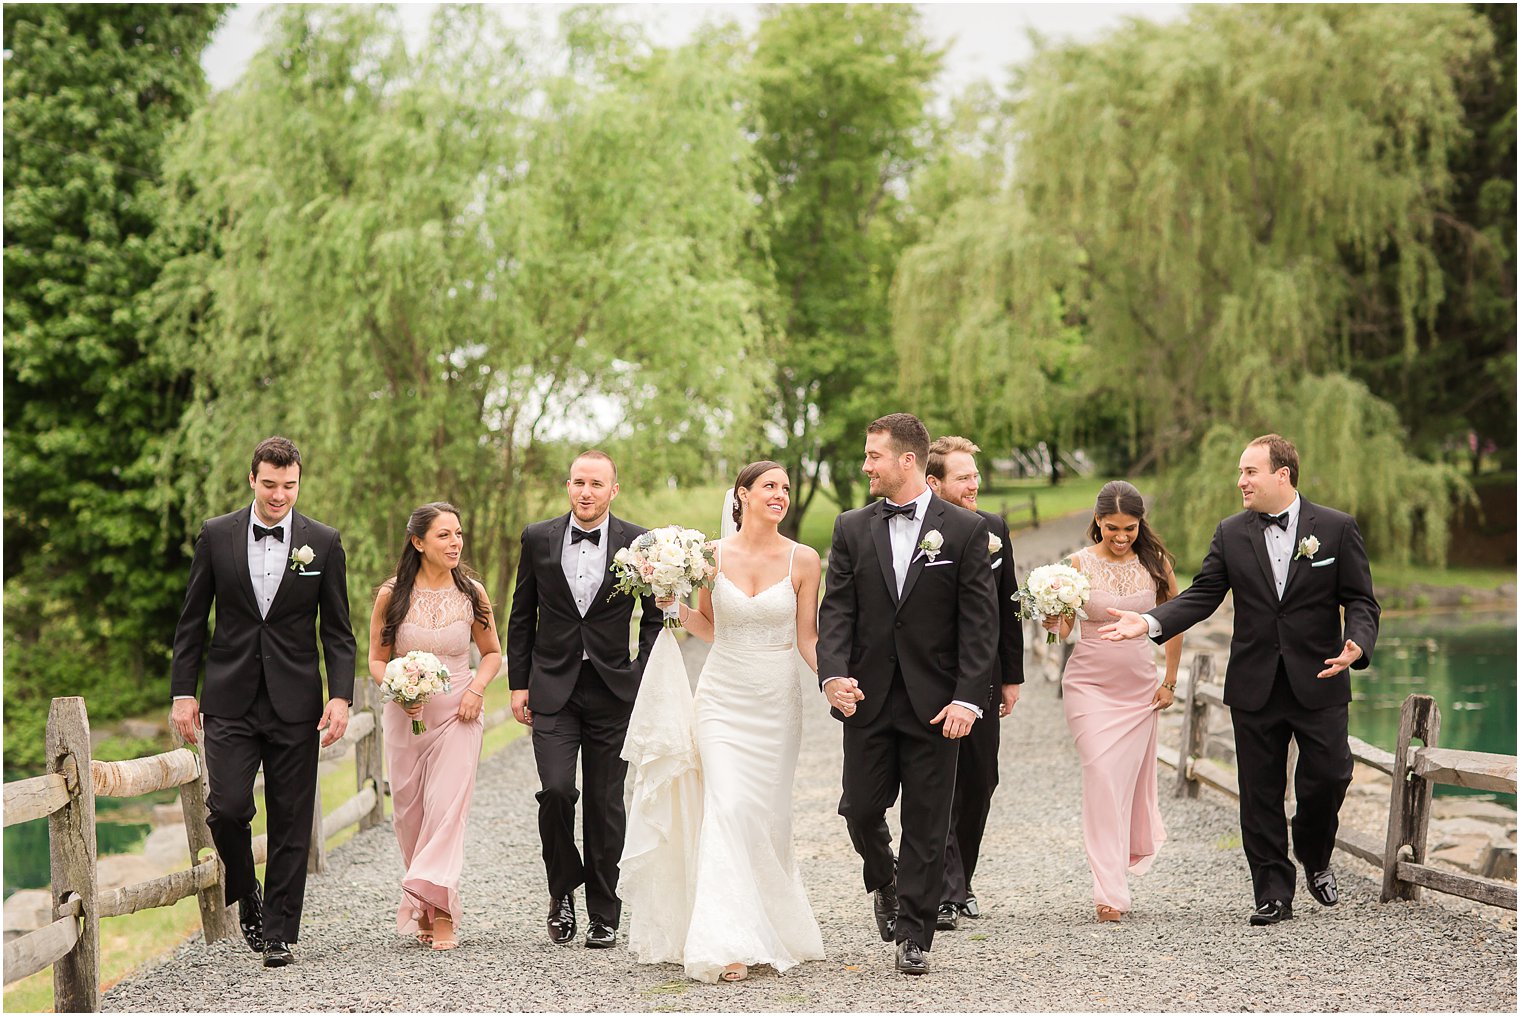 Bridal party photo | Wedding at Windows on the Water at Frogbridge